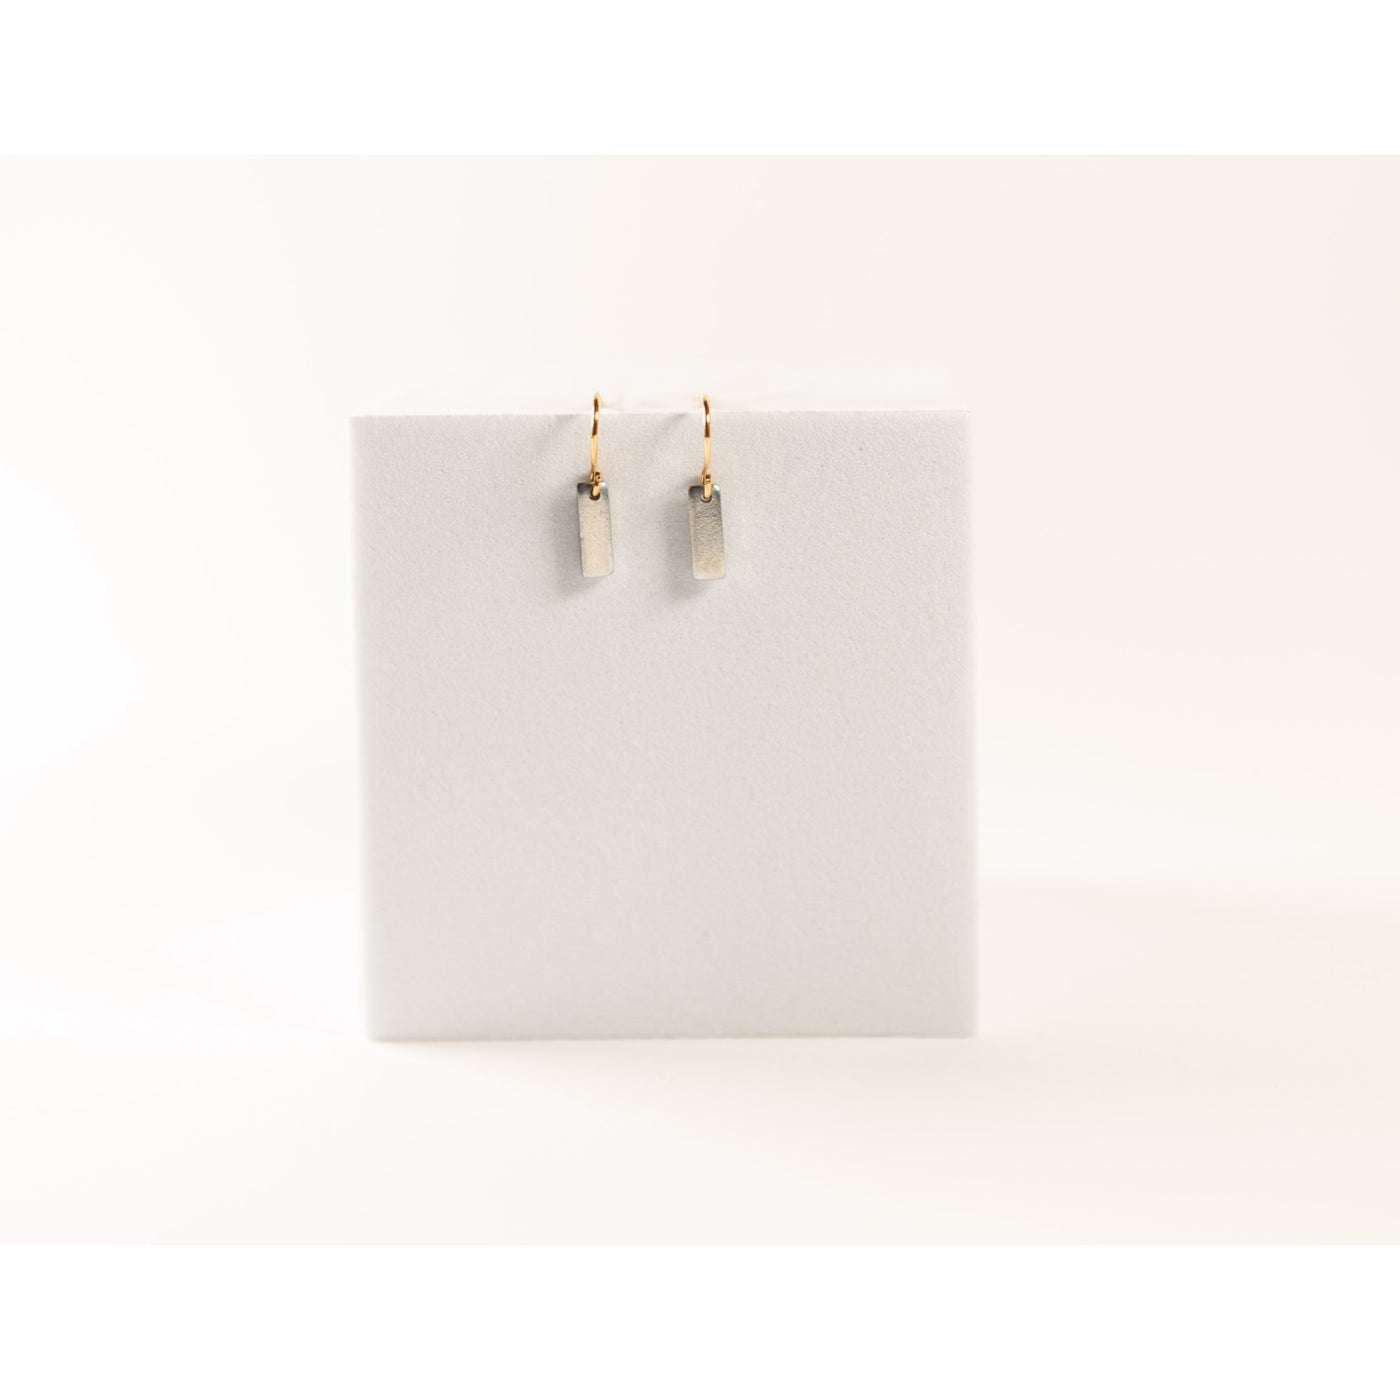 Mend On The Move Tiny Bar Earrings